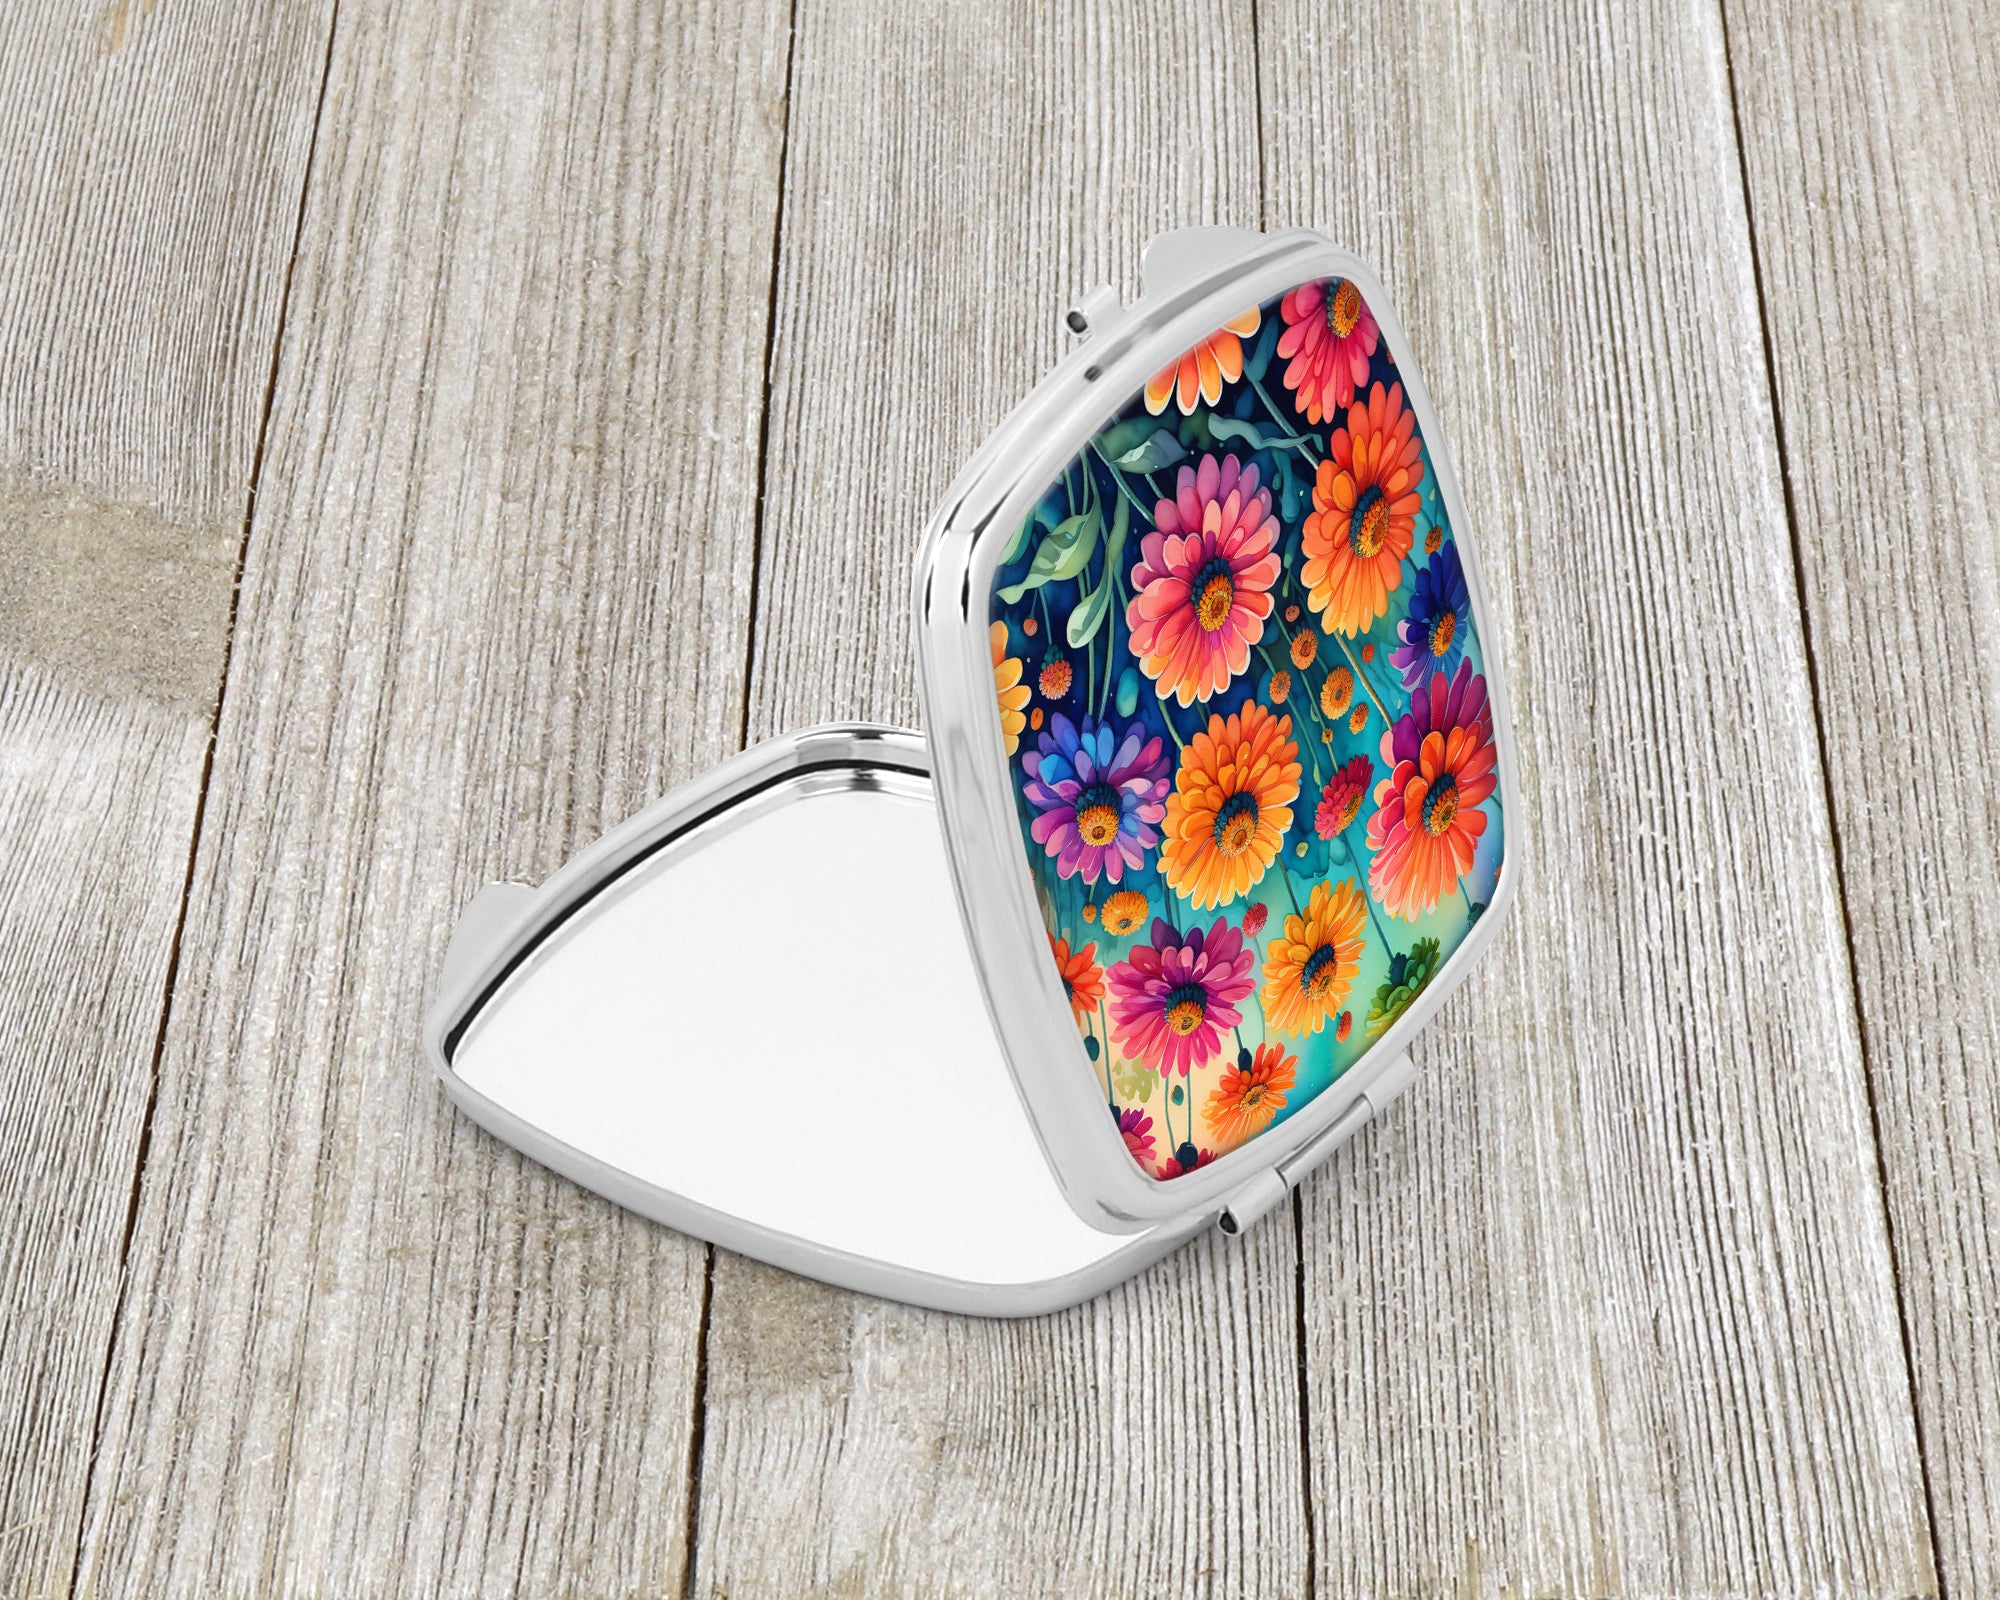 Buy this Colorful Zinnias Compact Mirror